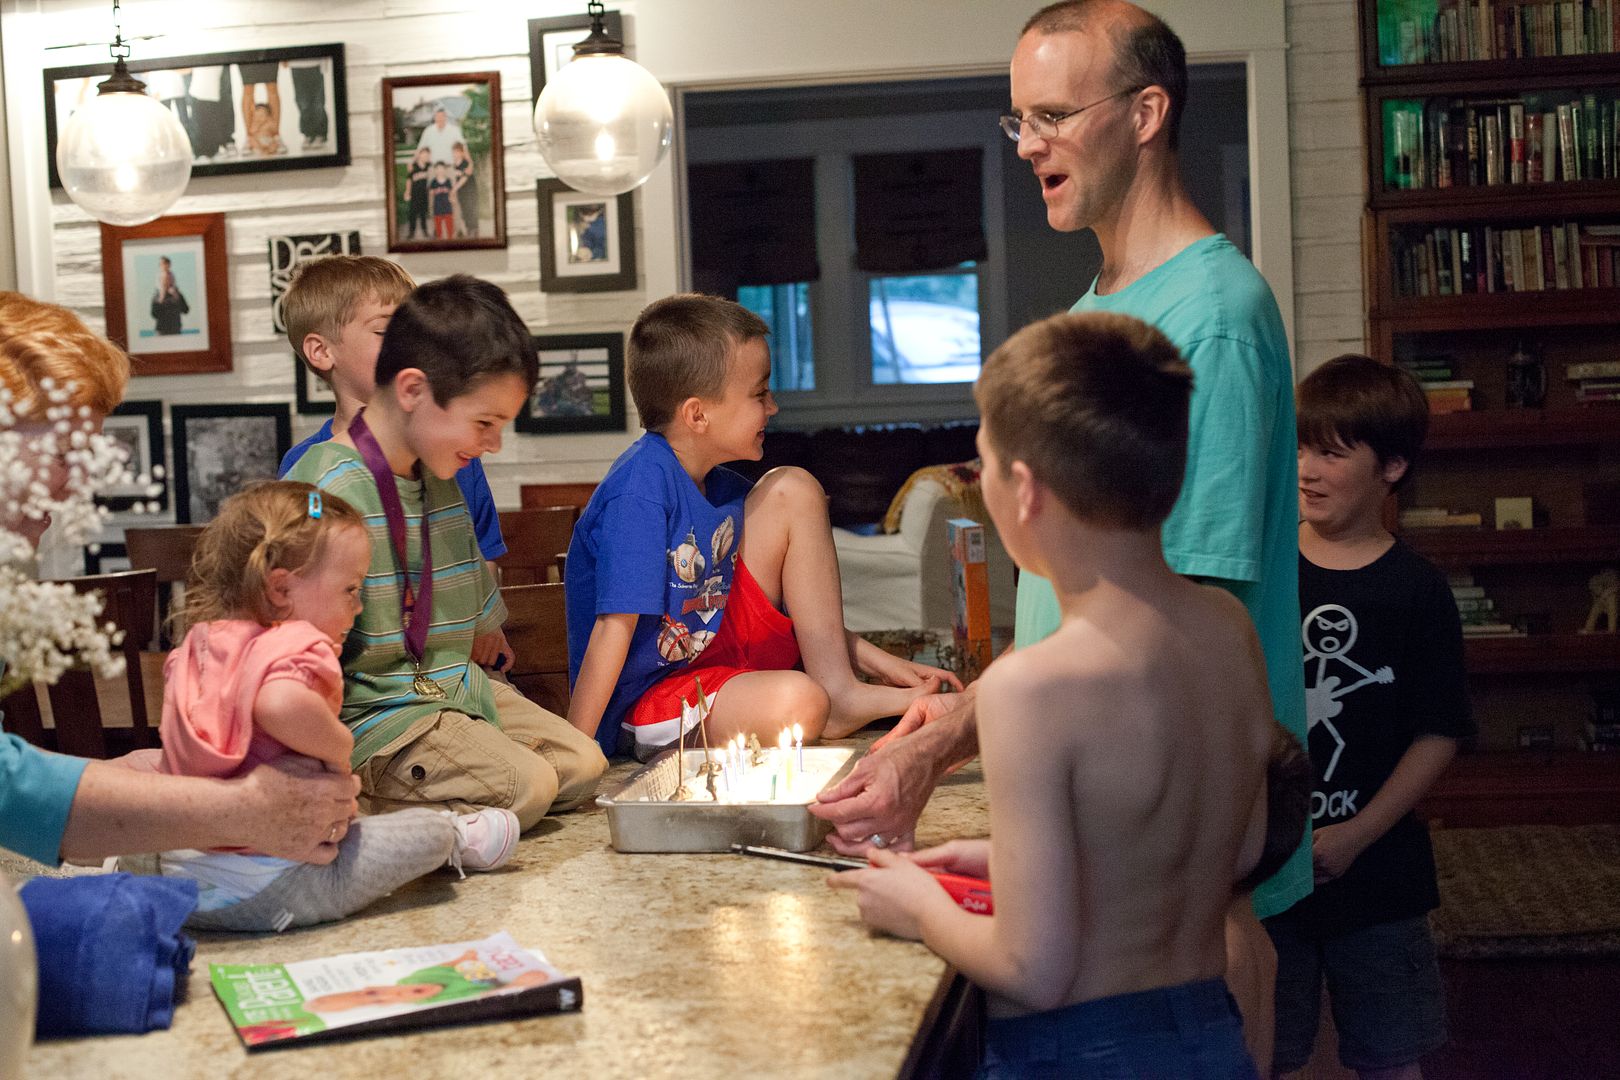 Ryan and his friends celebrating his 7th birthday